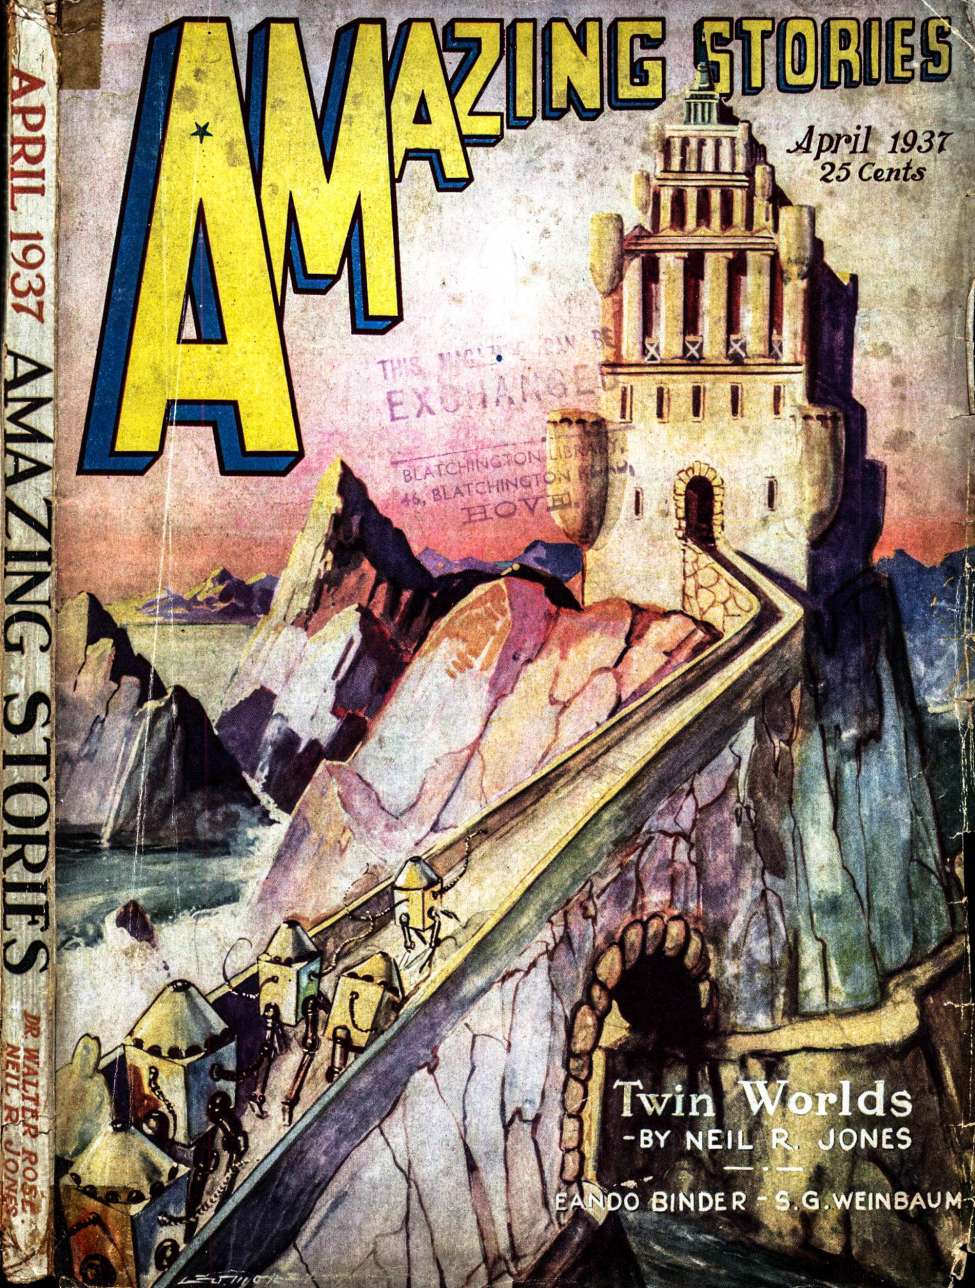 Book Cover For Amazing Stories v11 2 - Twin Worlds - Neil R. Jones